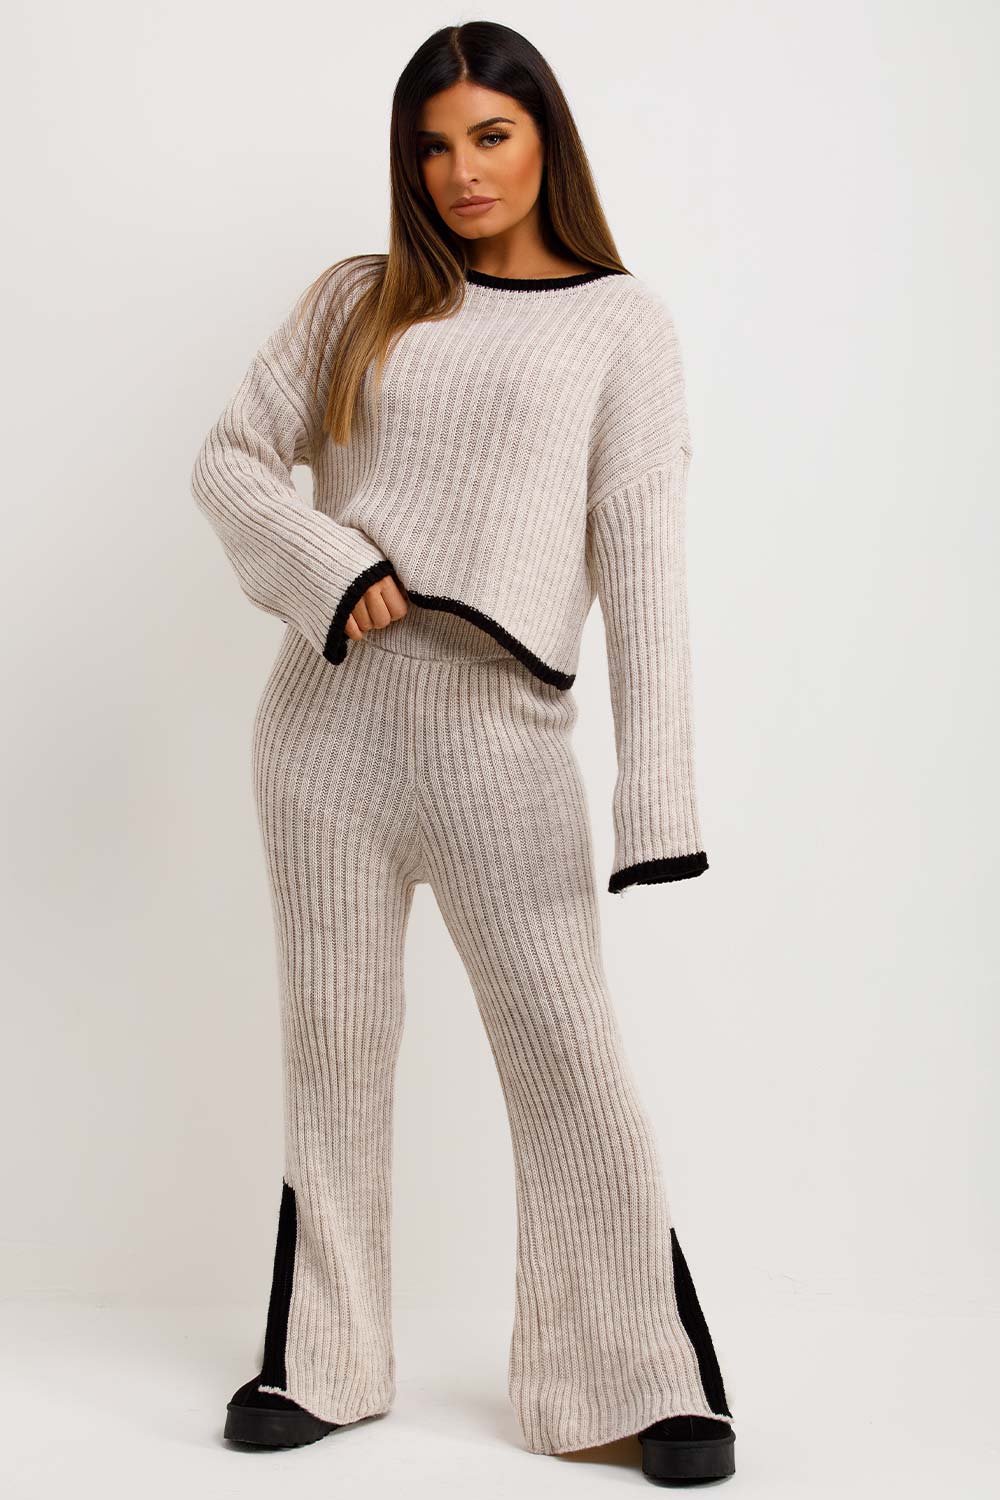 womens knitted jumper and trousers loungewear co ord set